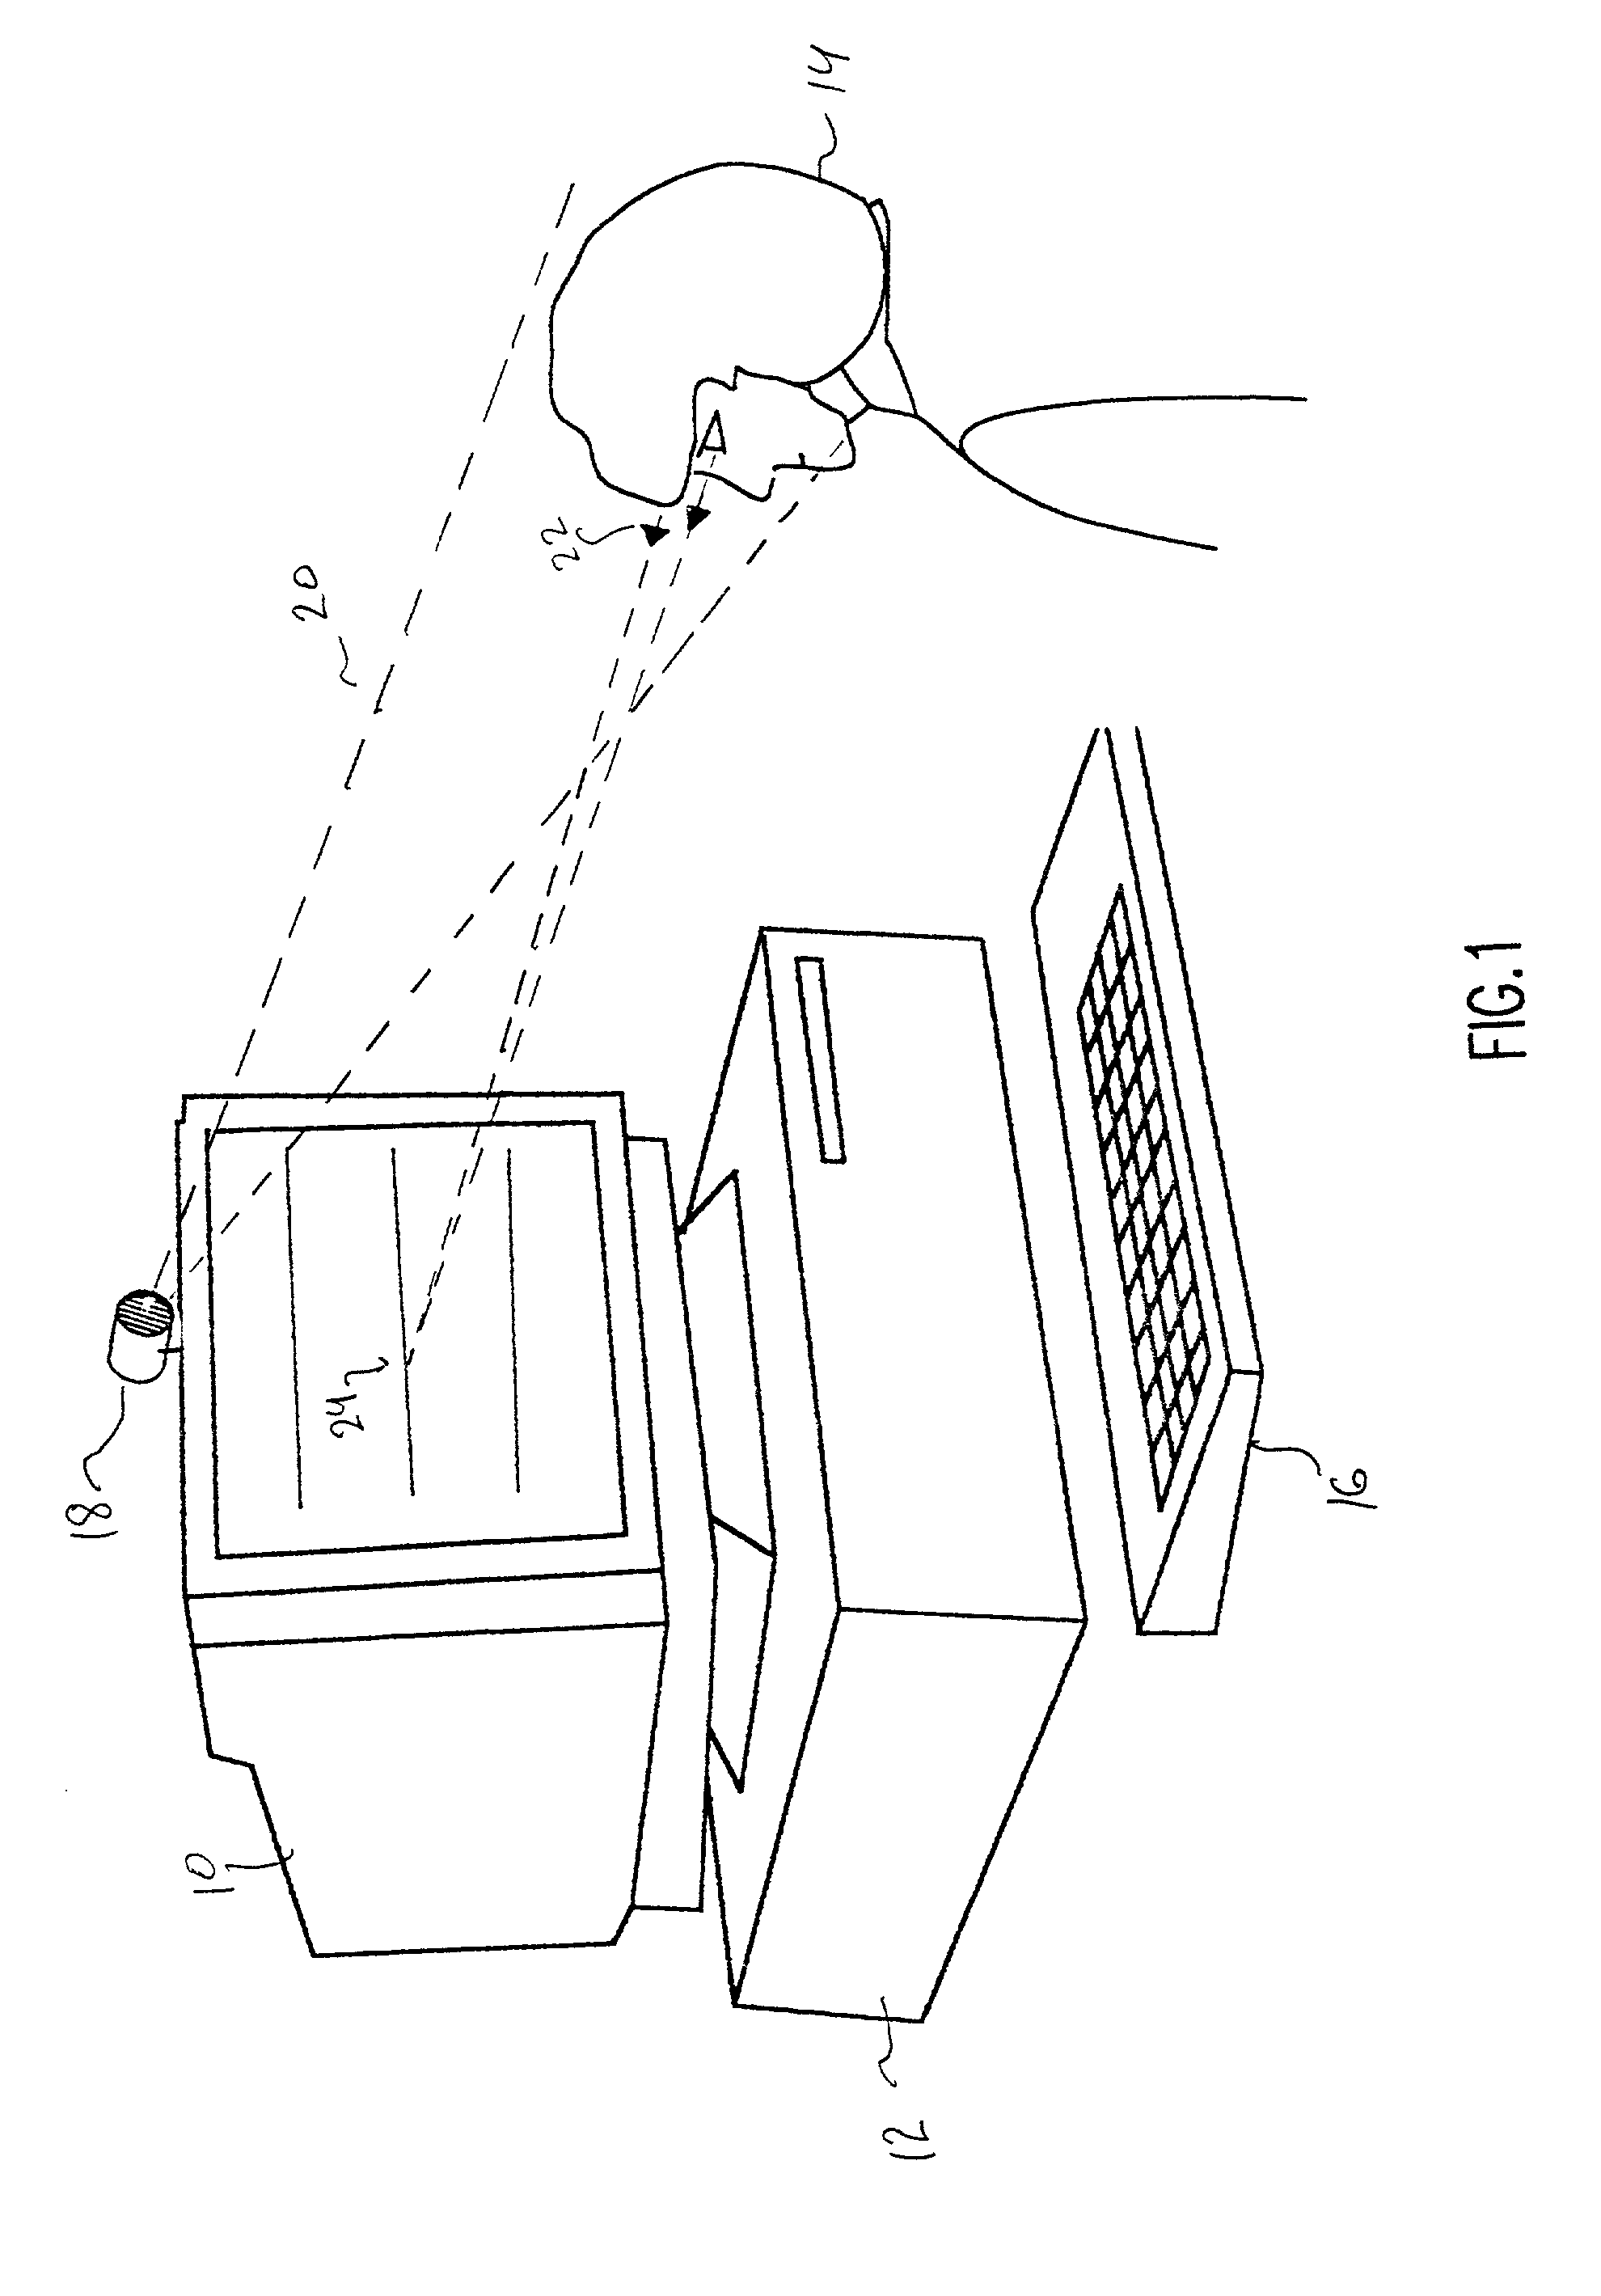 Method for increasing the signal-to-noise in IR-based eye gaze trackers